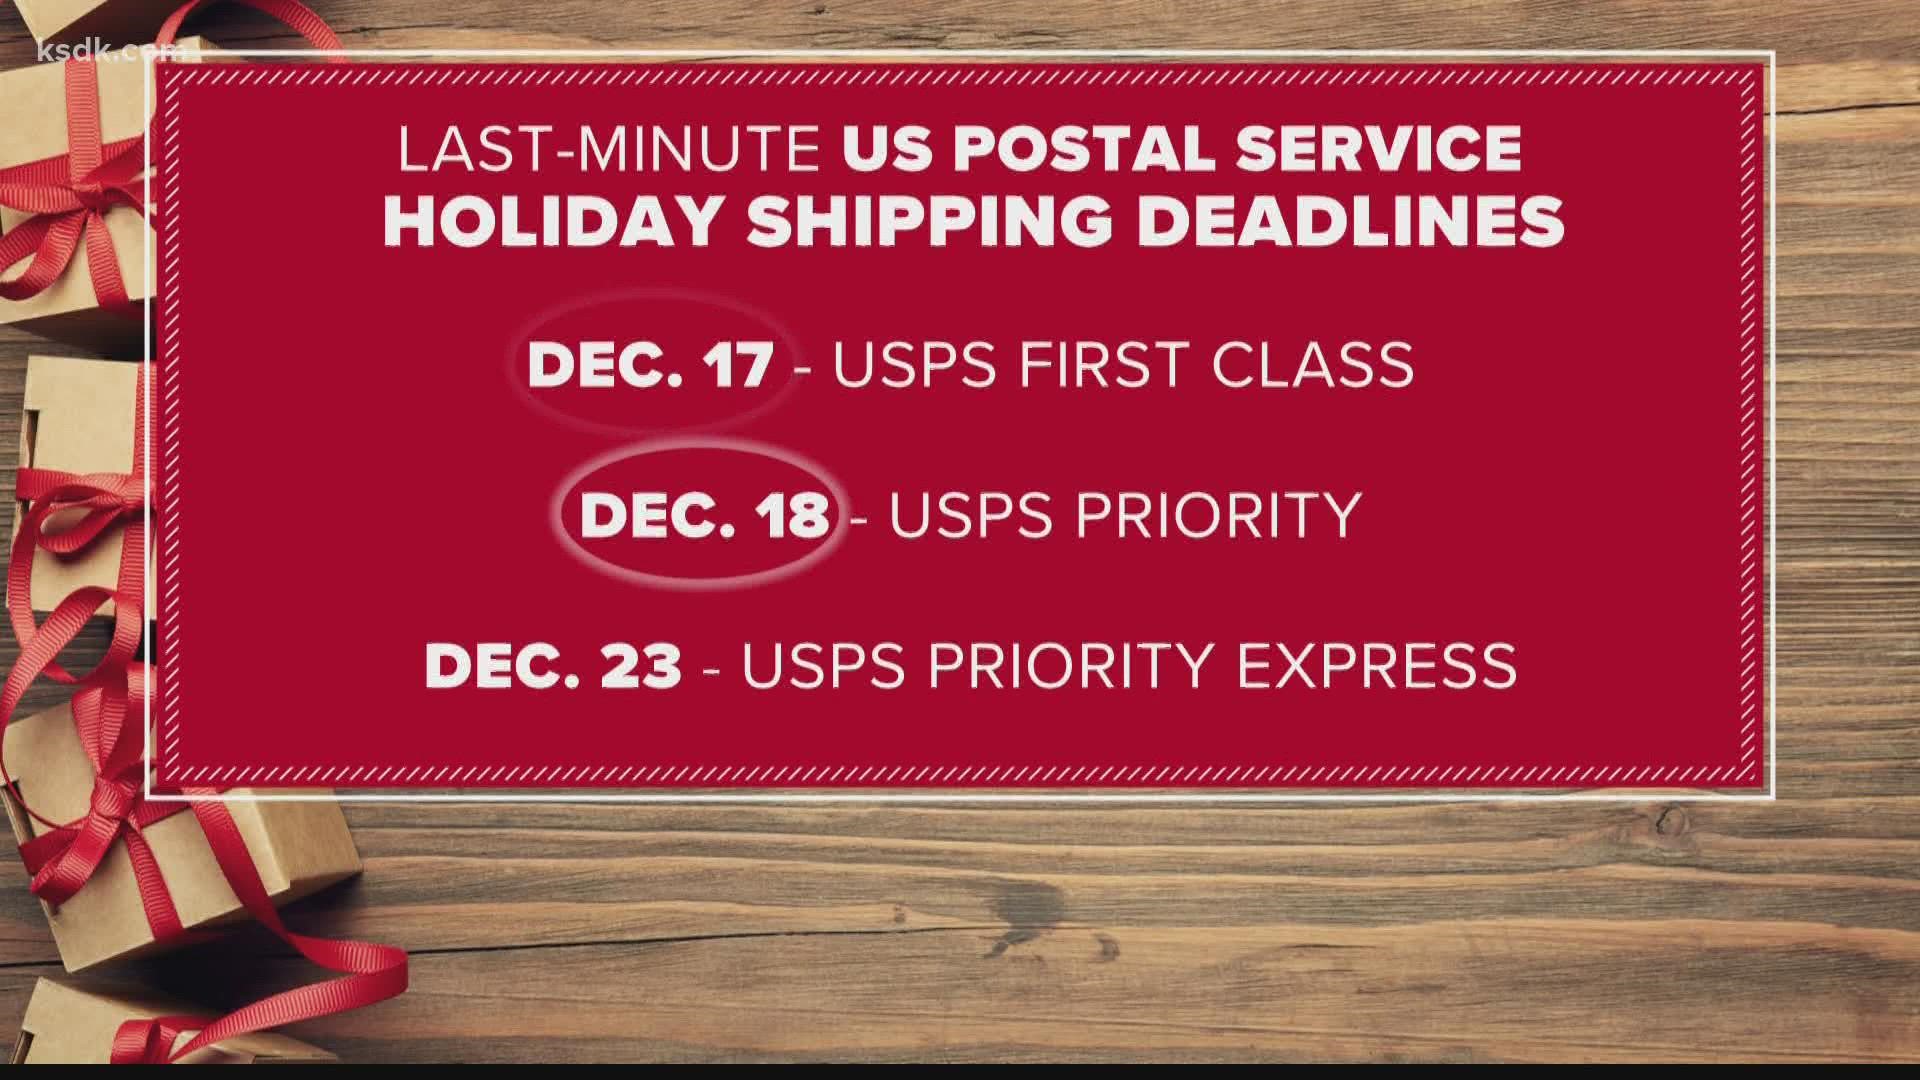 USPS said the week of Dec. 13 is the busiest shipping week of the holiday season. It estimates about 2.3 billion pieces of first class mail will be delivered.